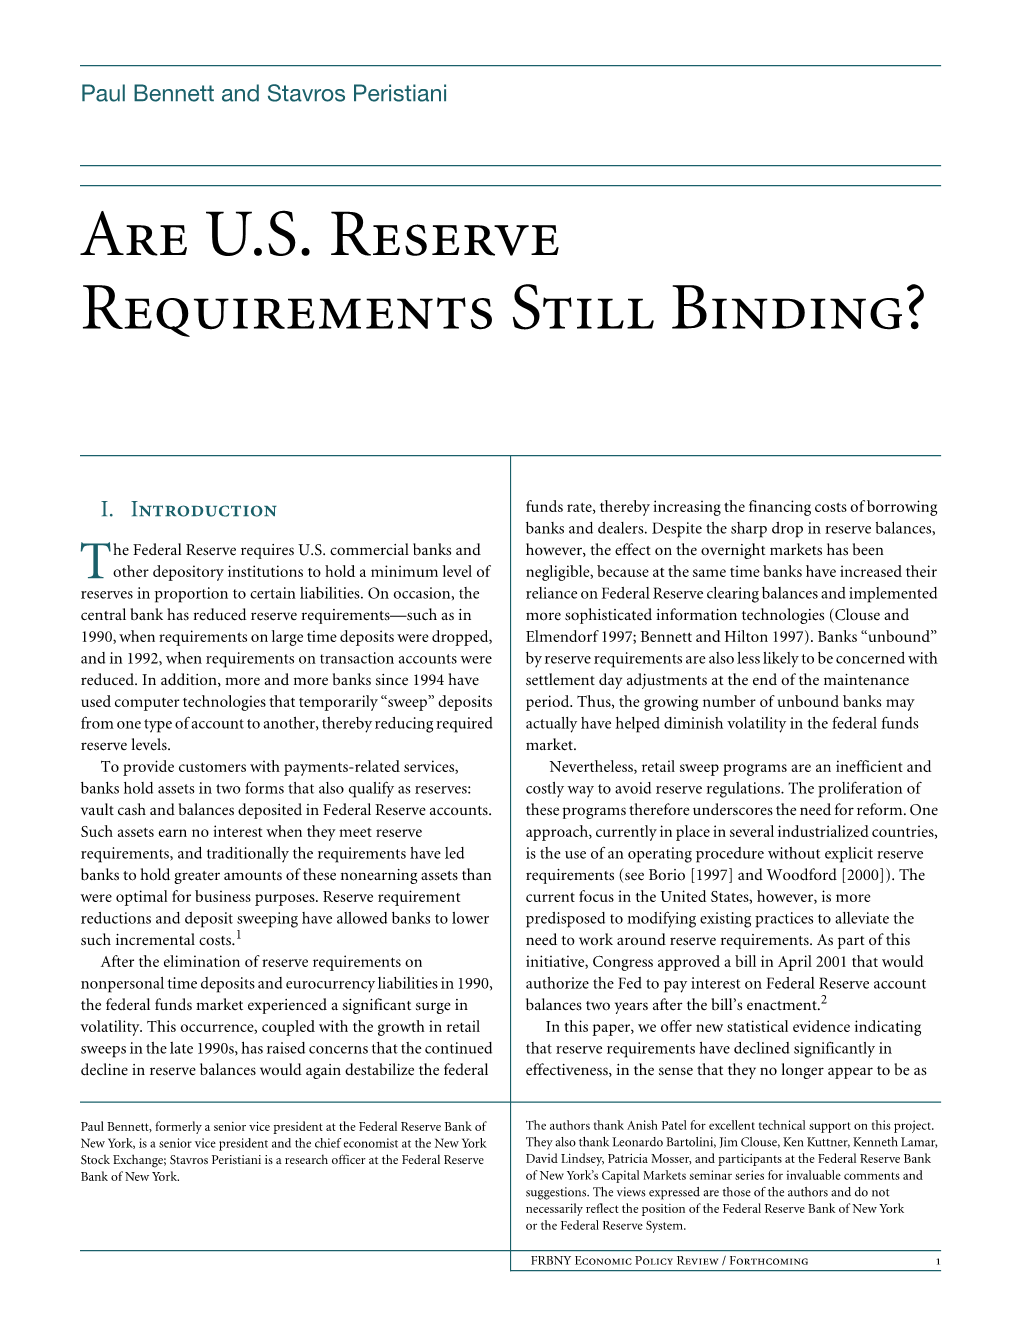 Are U.S. Reserve Requirements Still Binding?